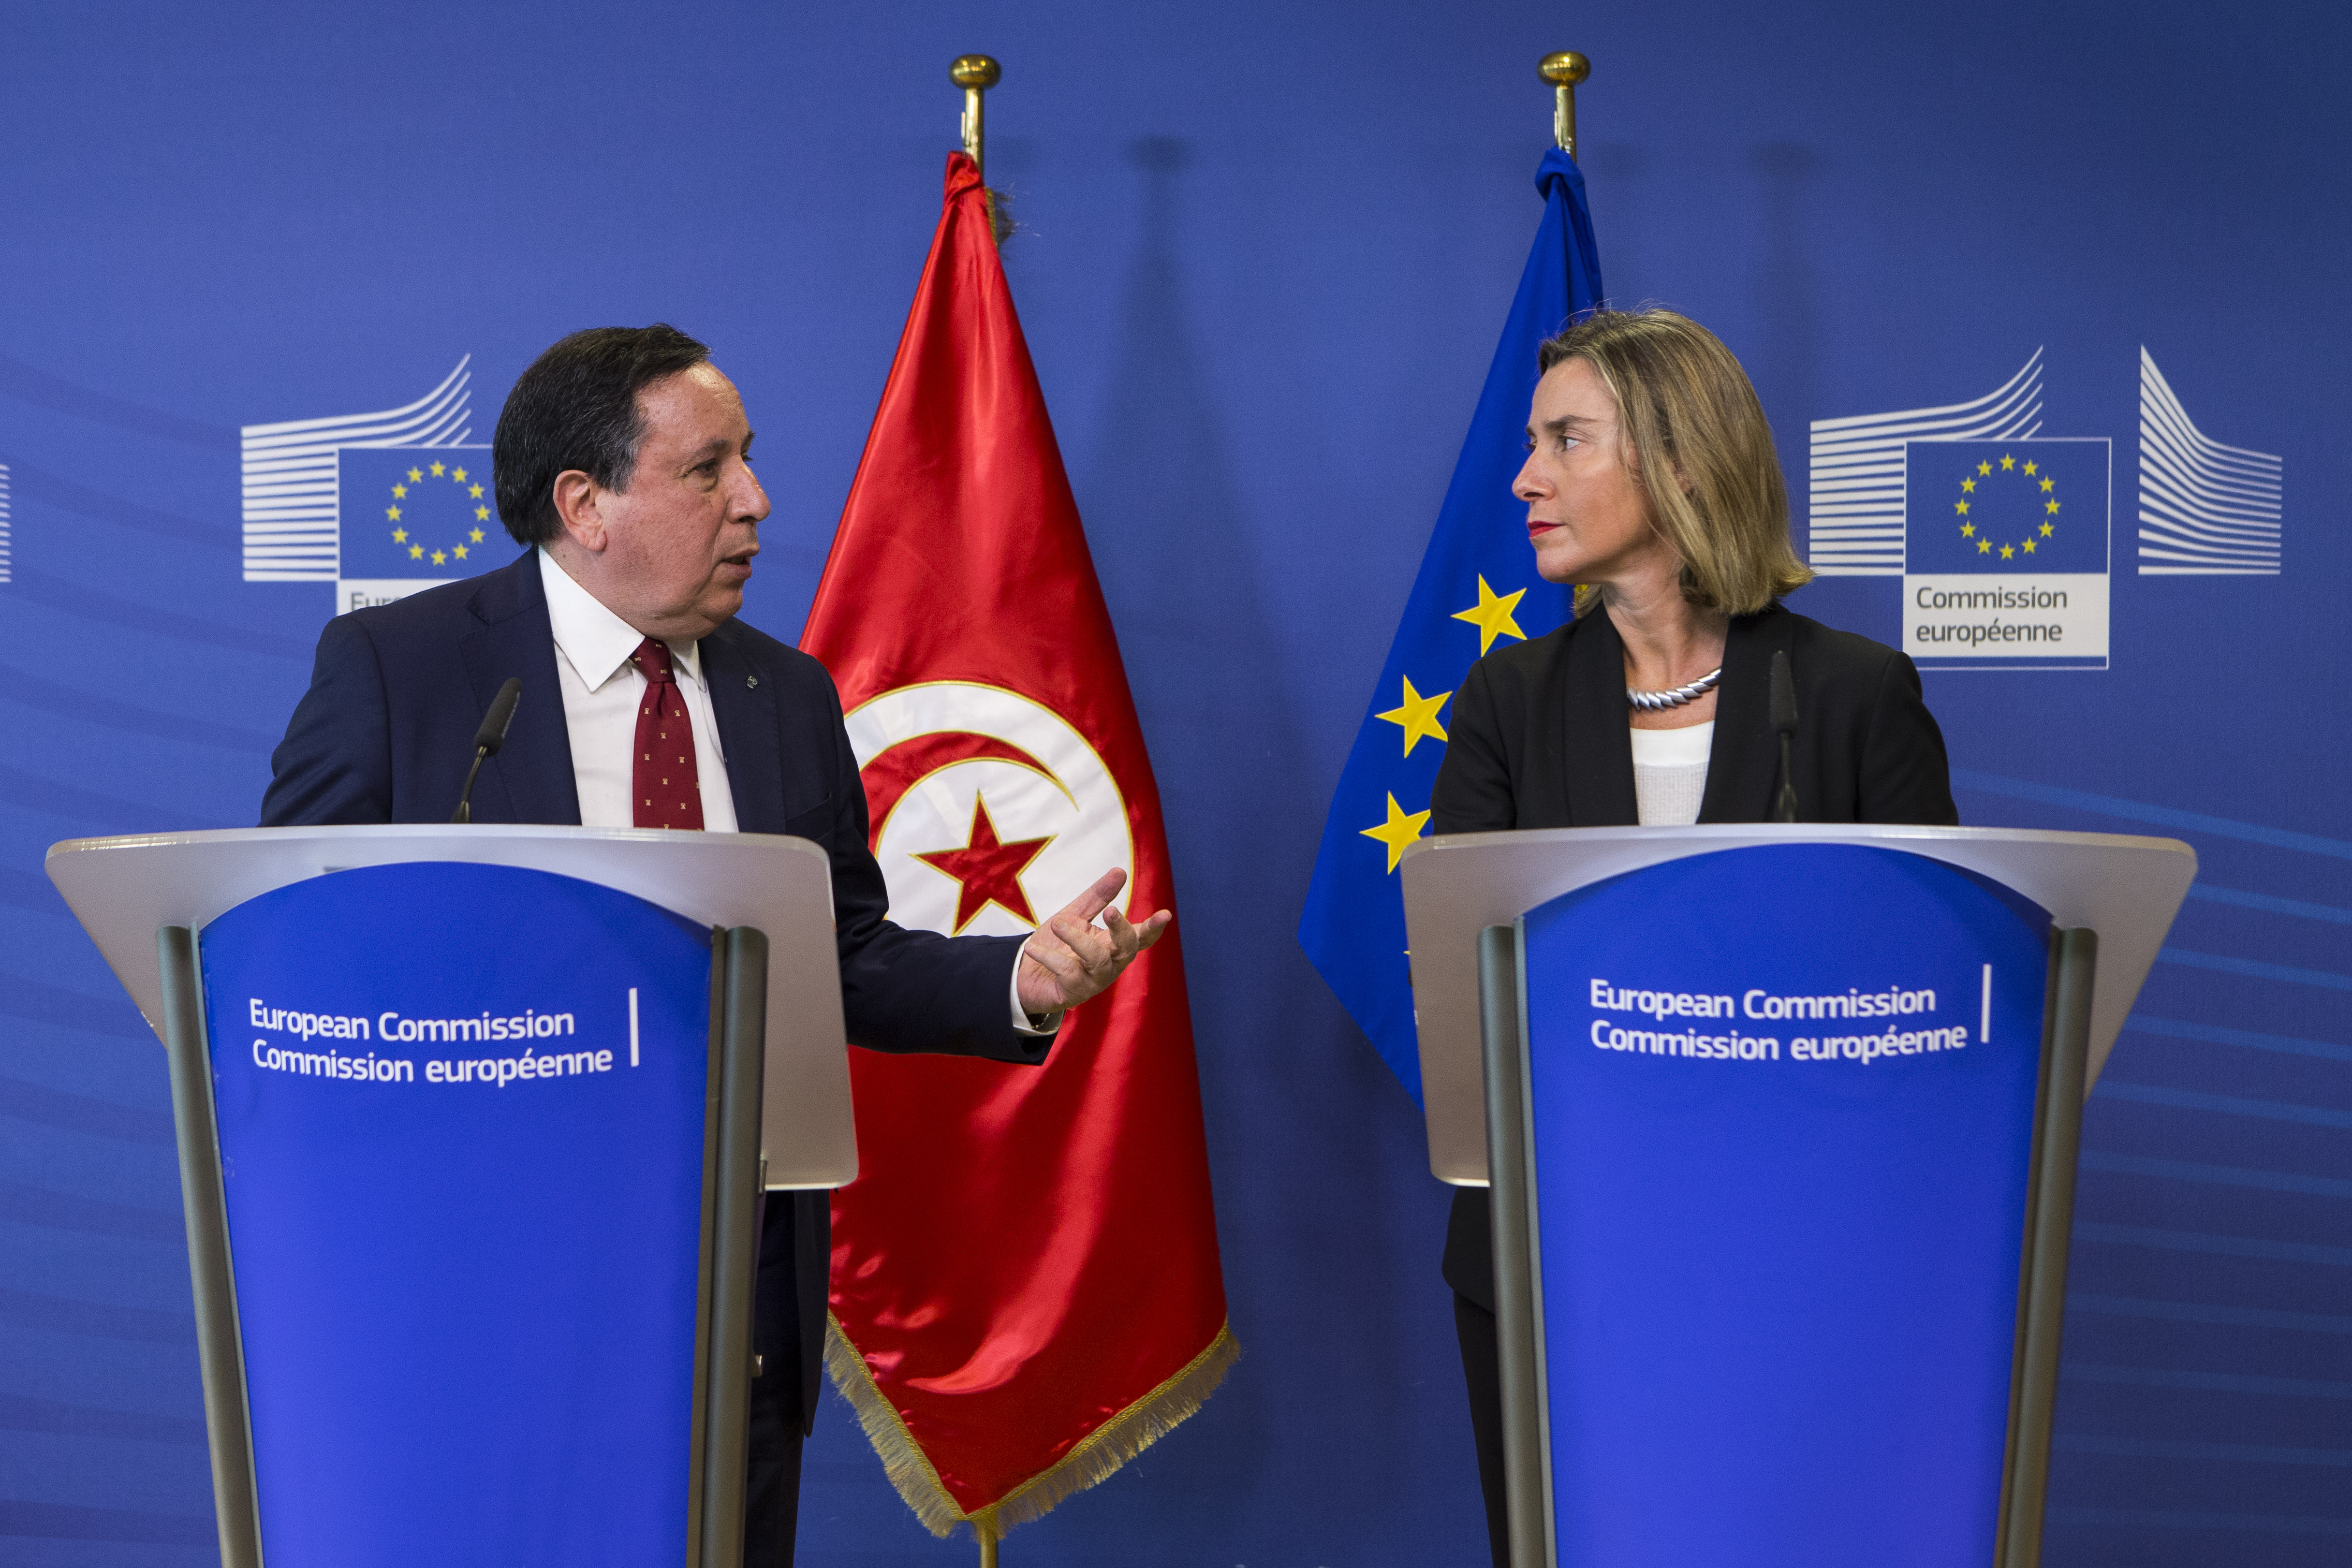 EU high Representative Federica Mogherini during the press conference with Tunisian Foreign Minister Khemaies Jhinaoui